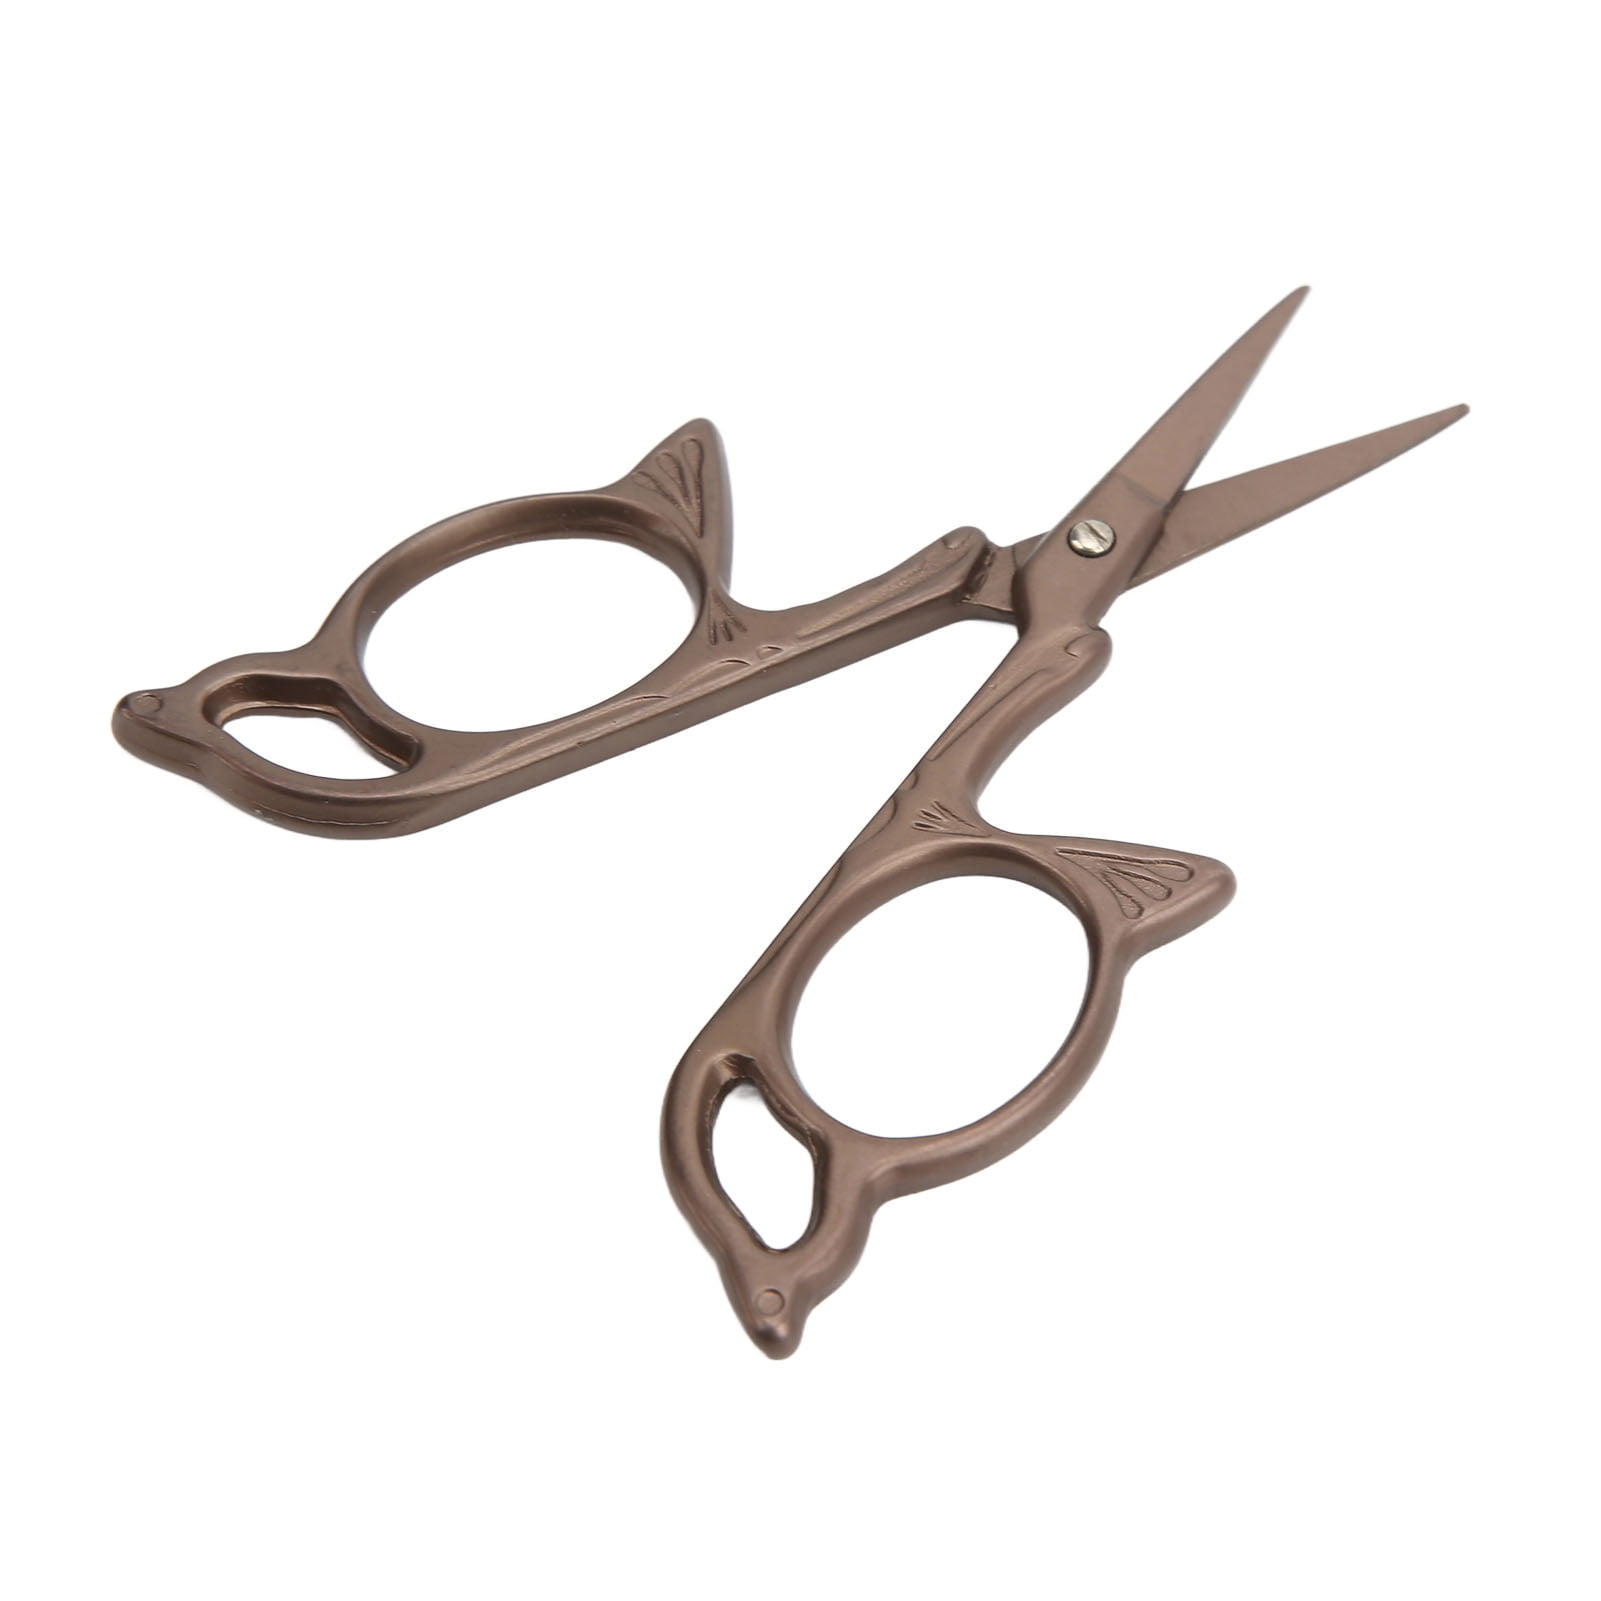 Milward Embroidery Scissors, Curved